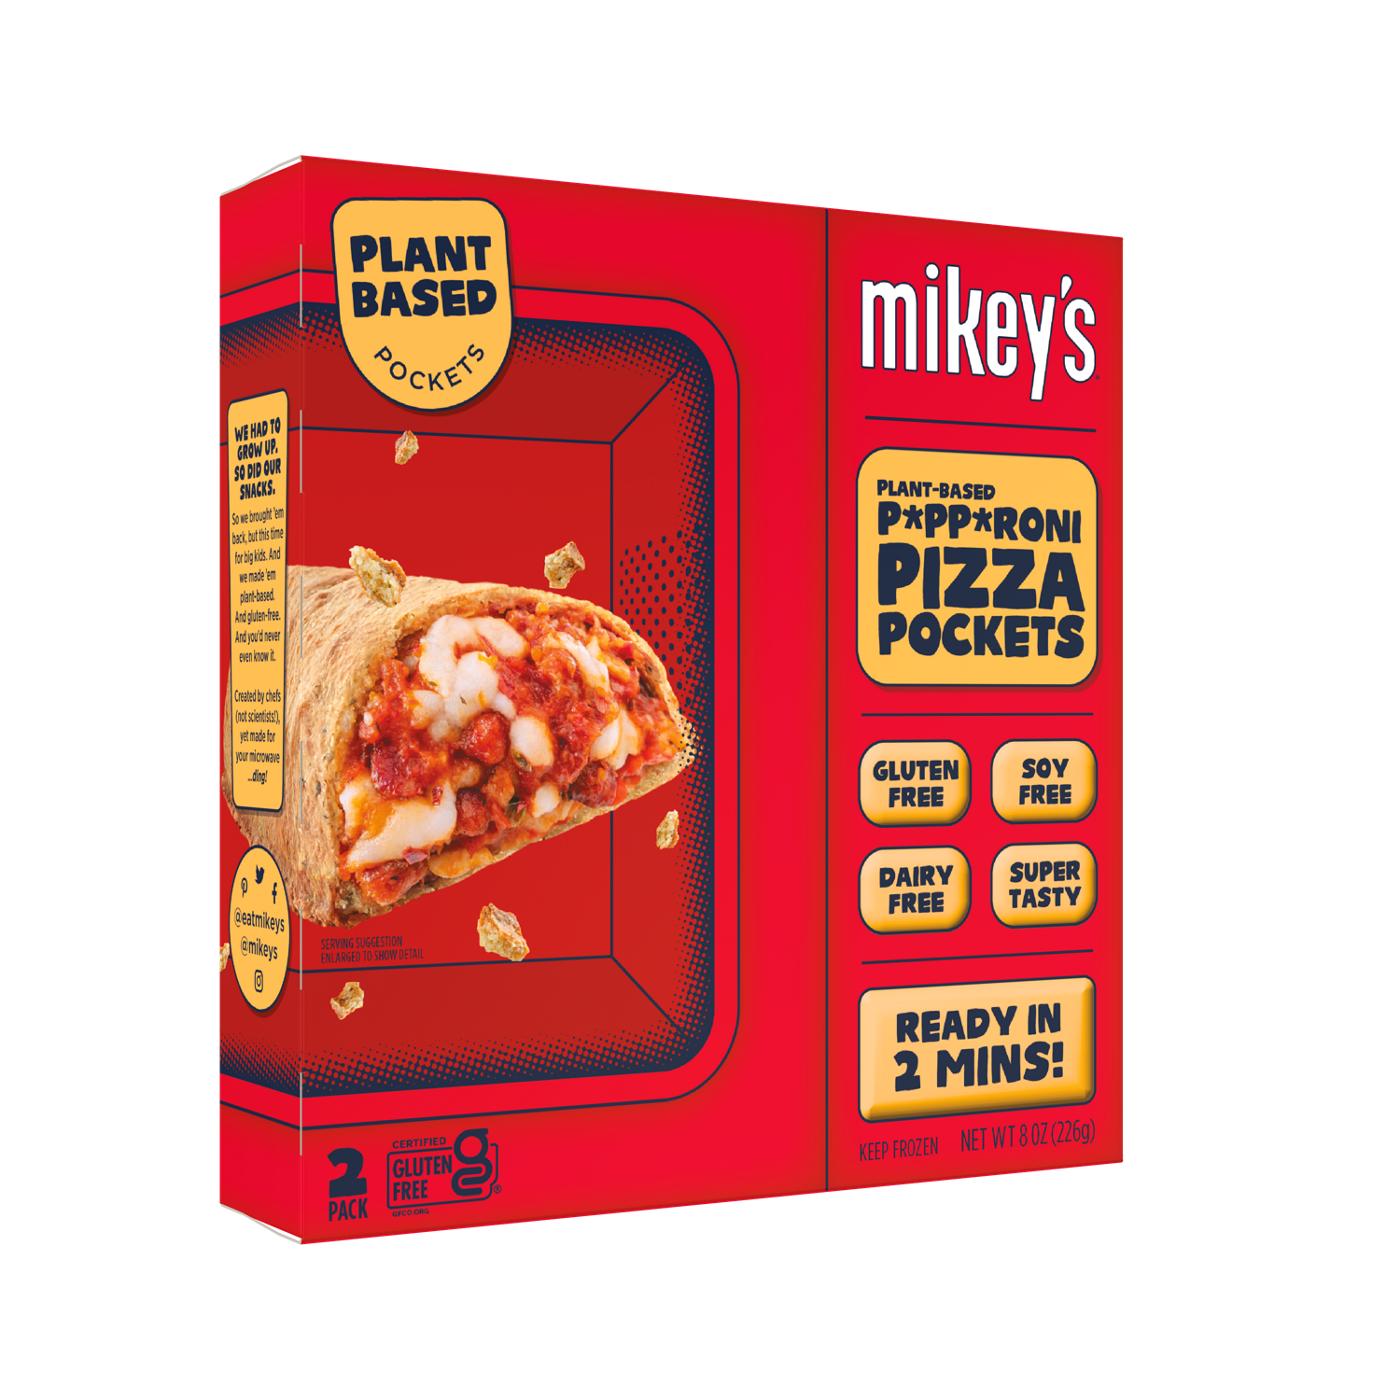 Mikey's Frozen Plant-Based Pepperoni Pizza Pockets; image 1 of 5